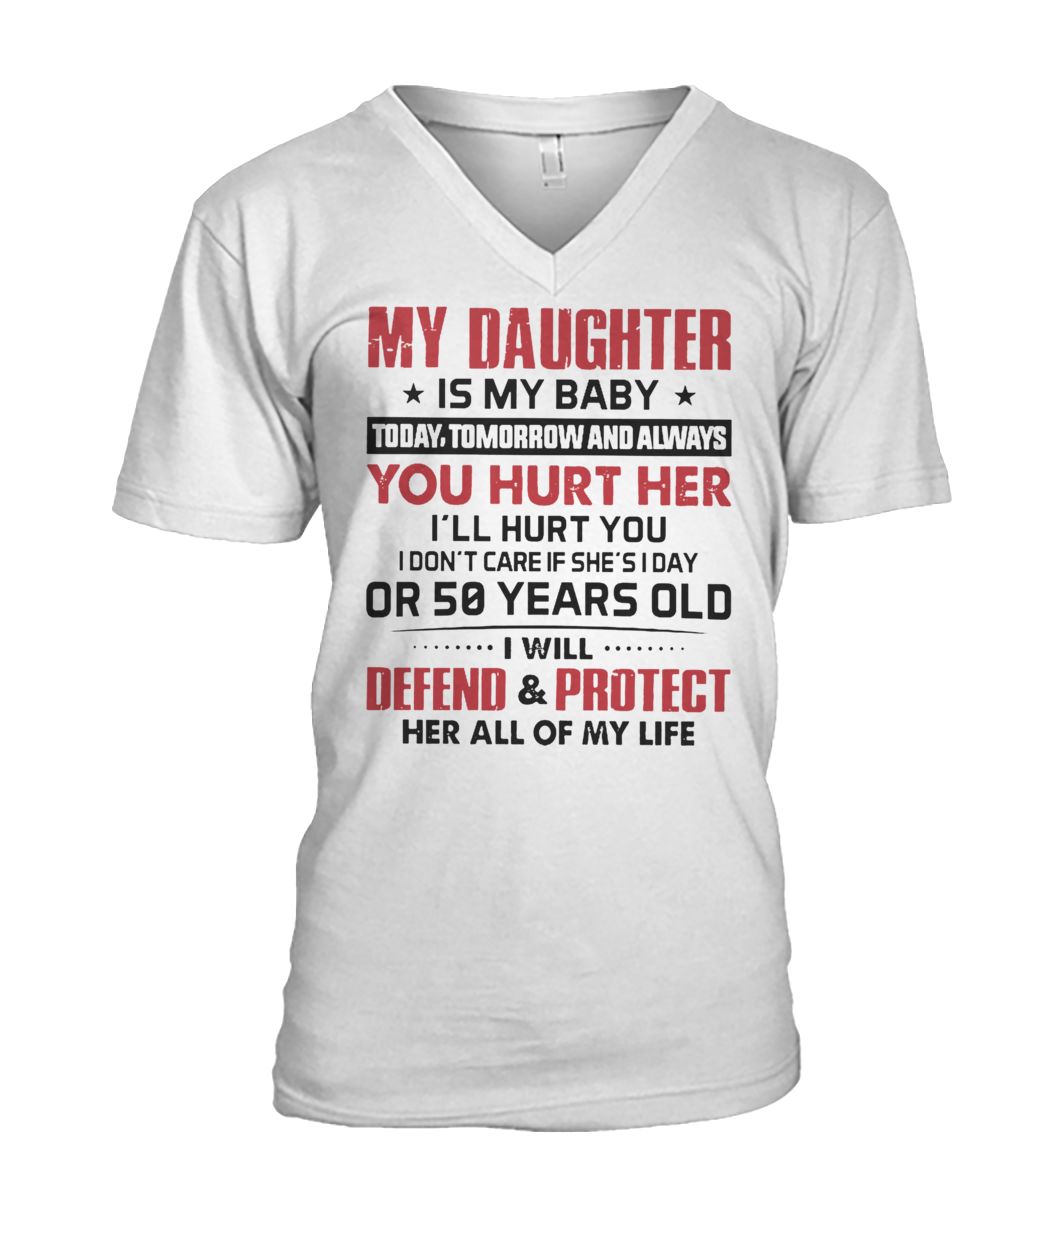 My daughter is my baby today tomorrow and always if you hurt her I'll hurt you mens v-neck